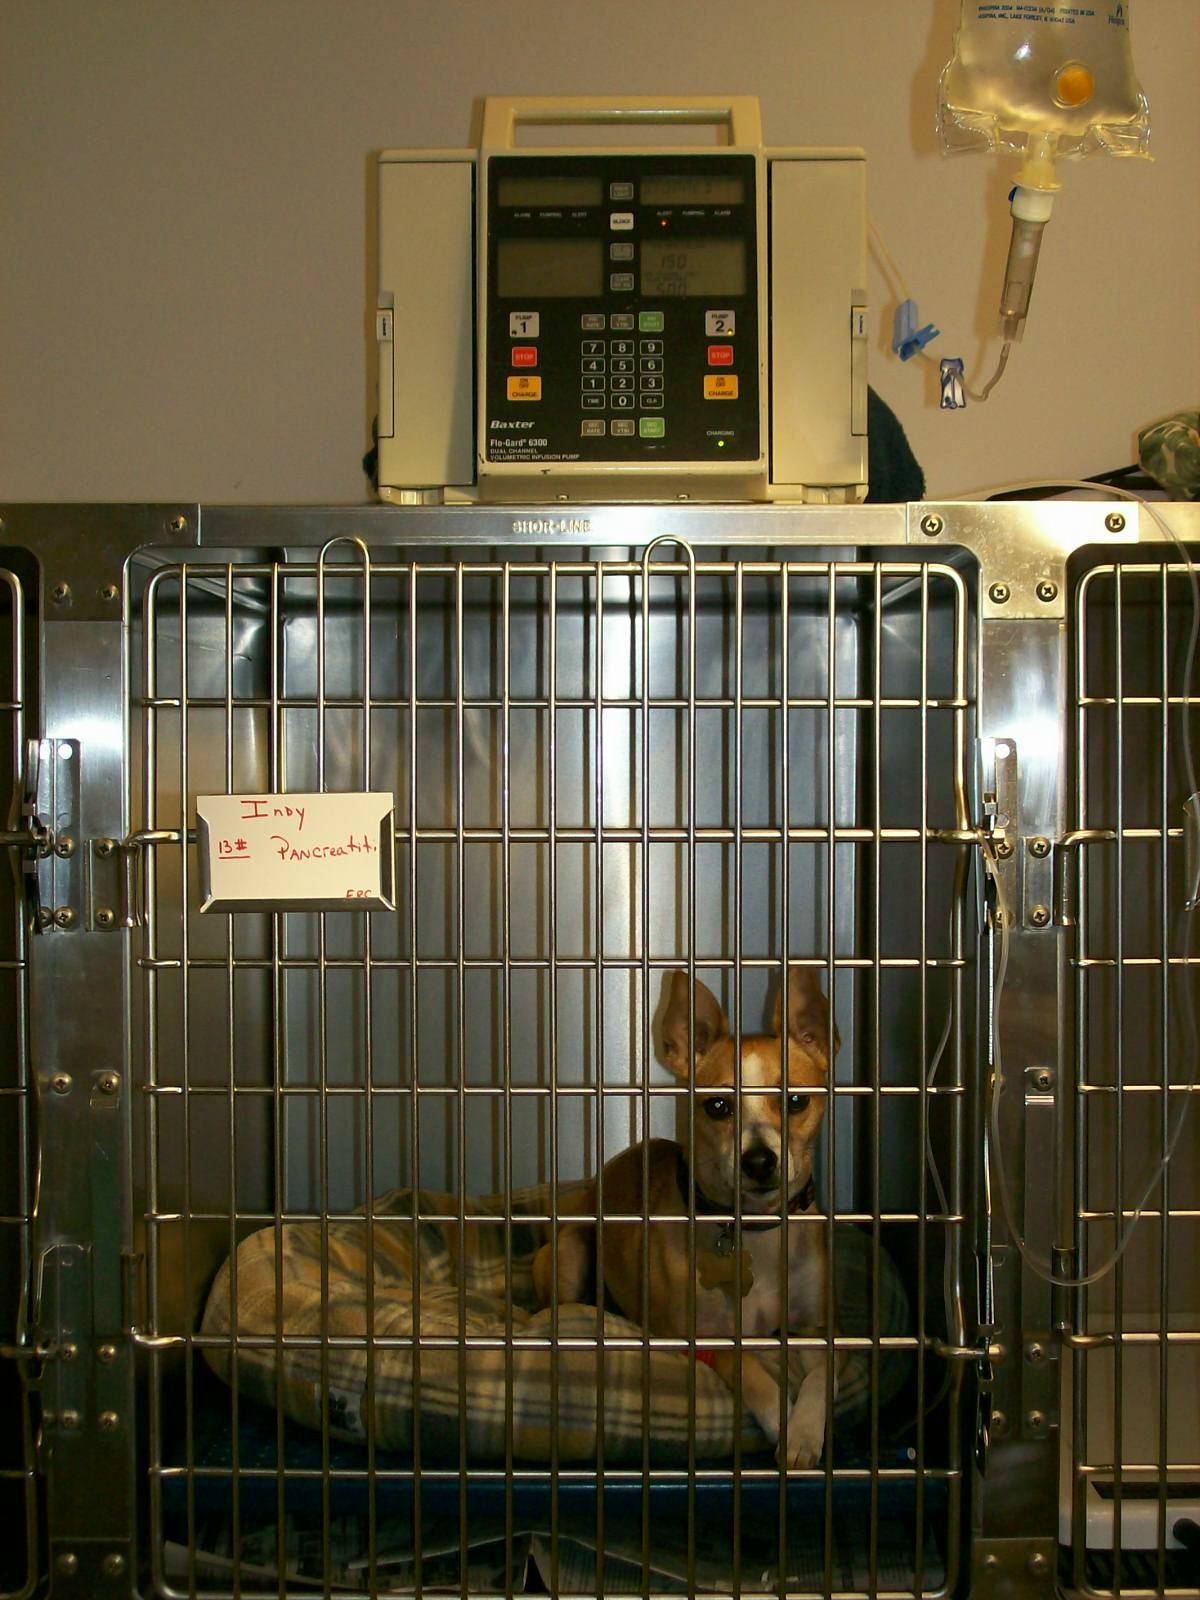 Isolation and Hospitalization of cats and dogs